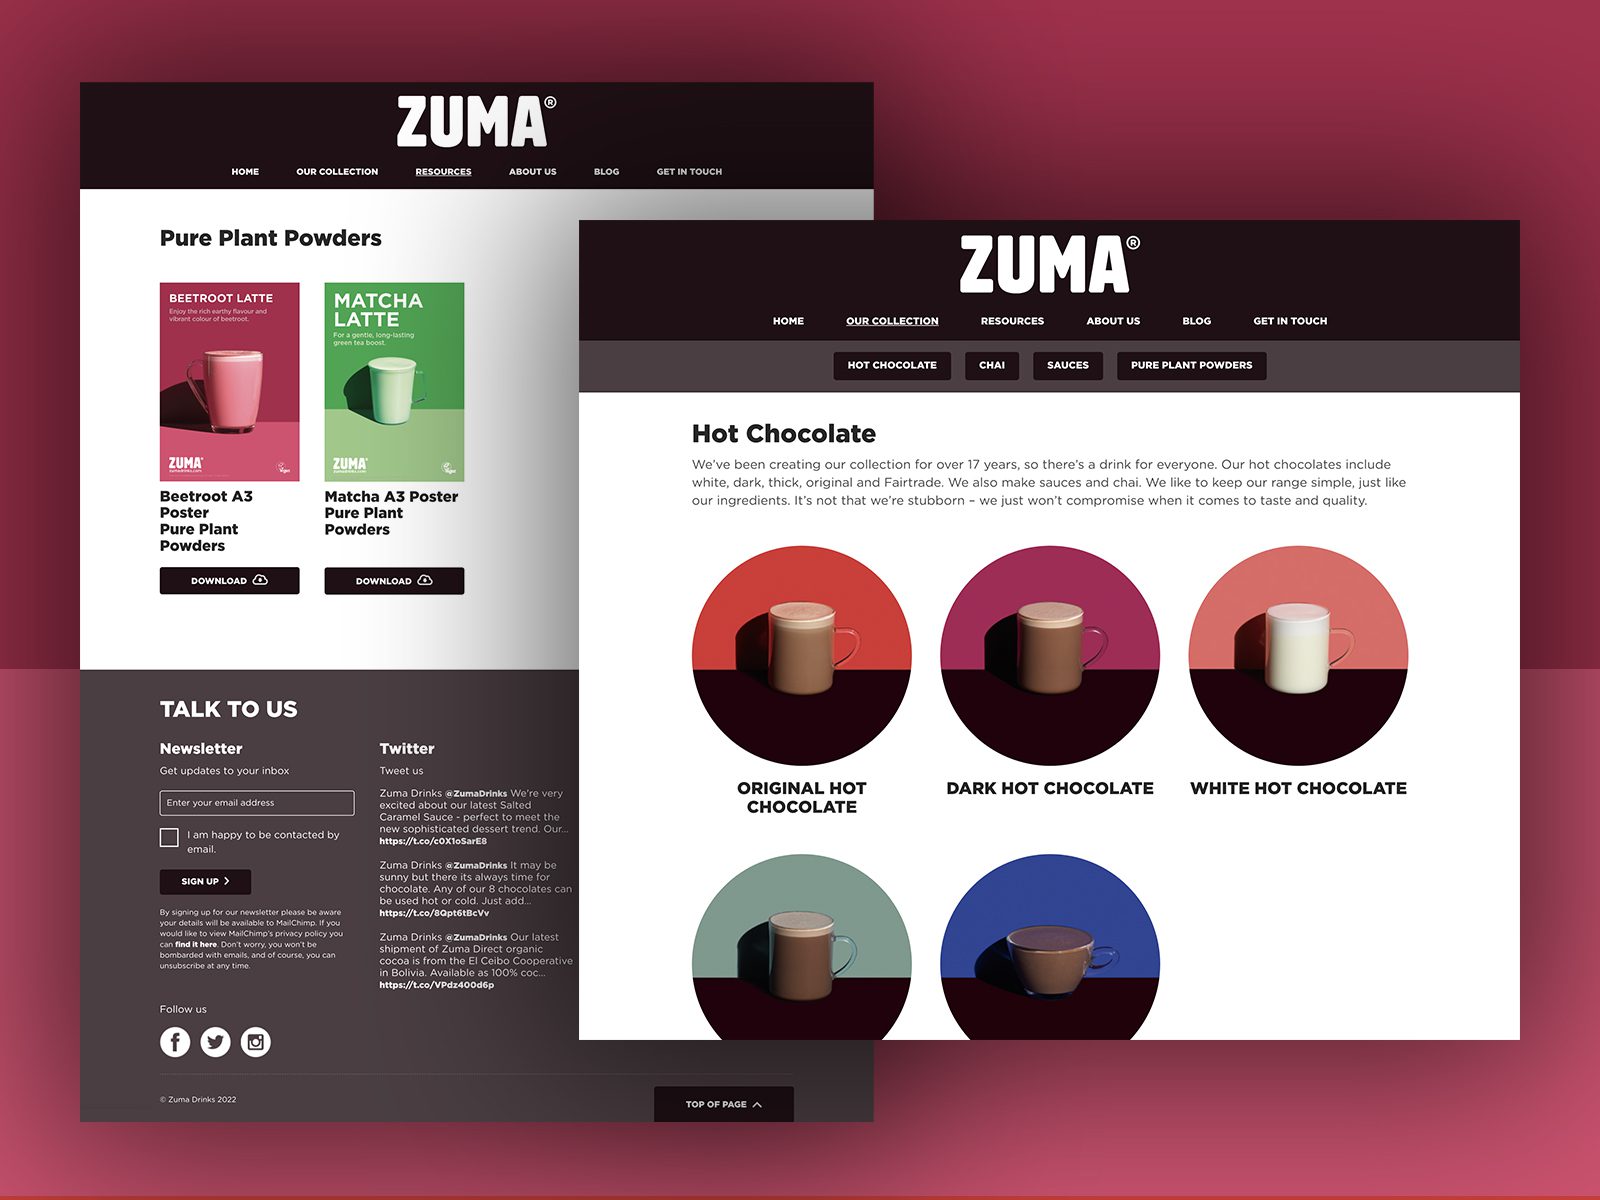 Zuma Website Design, Resources and Collections Pages